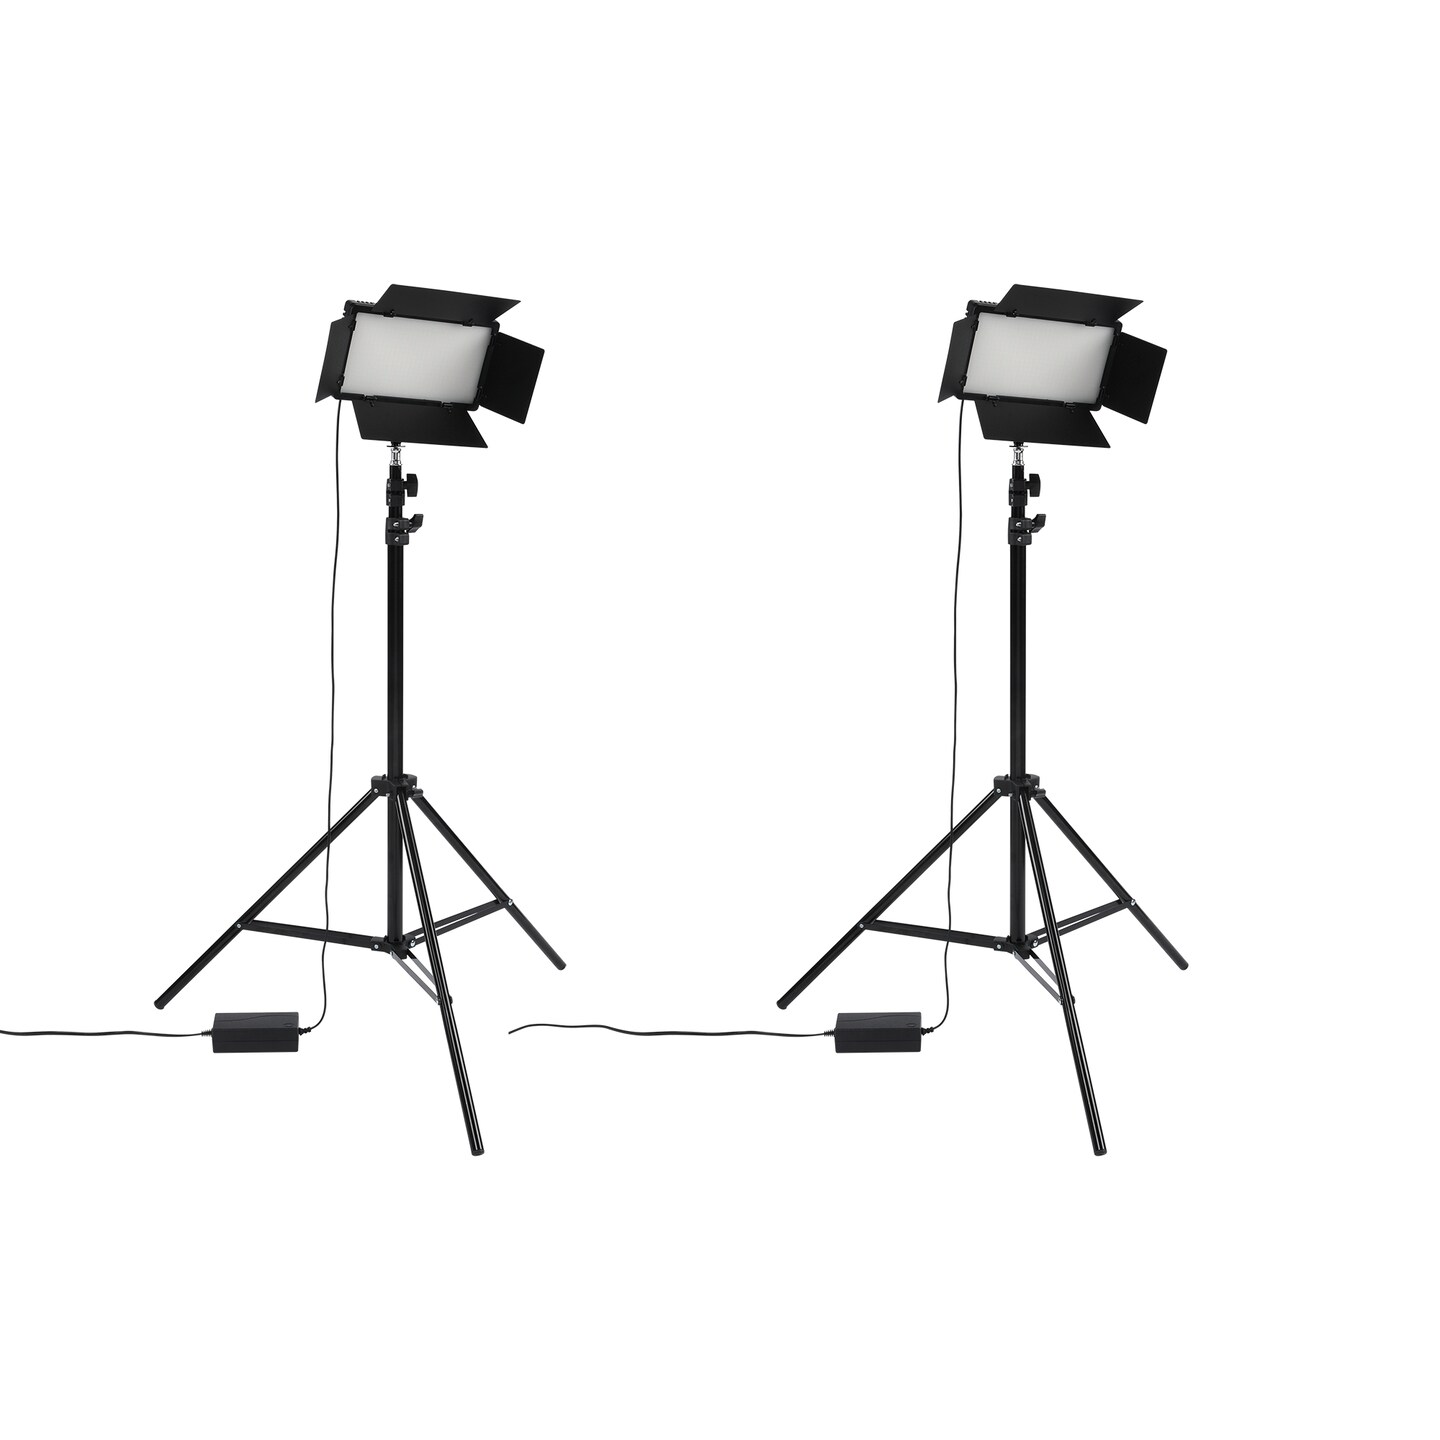 Acurit Colorview Lux Artist Studio Light 2 Pack - Adjustable Photography Lighting Kit 3 Color Temps, 4 Metal Barn Doors, 4160 Lumens LED - Remote Control, AC Power Supply, 6&#x2019;6&#x22; Light Stands Included